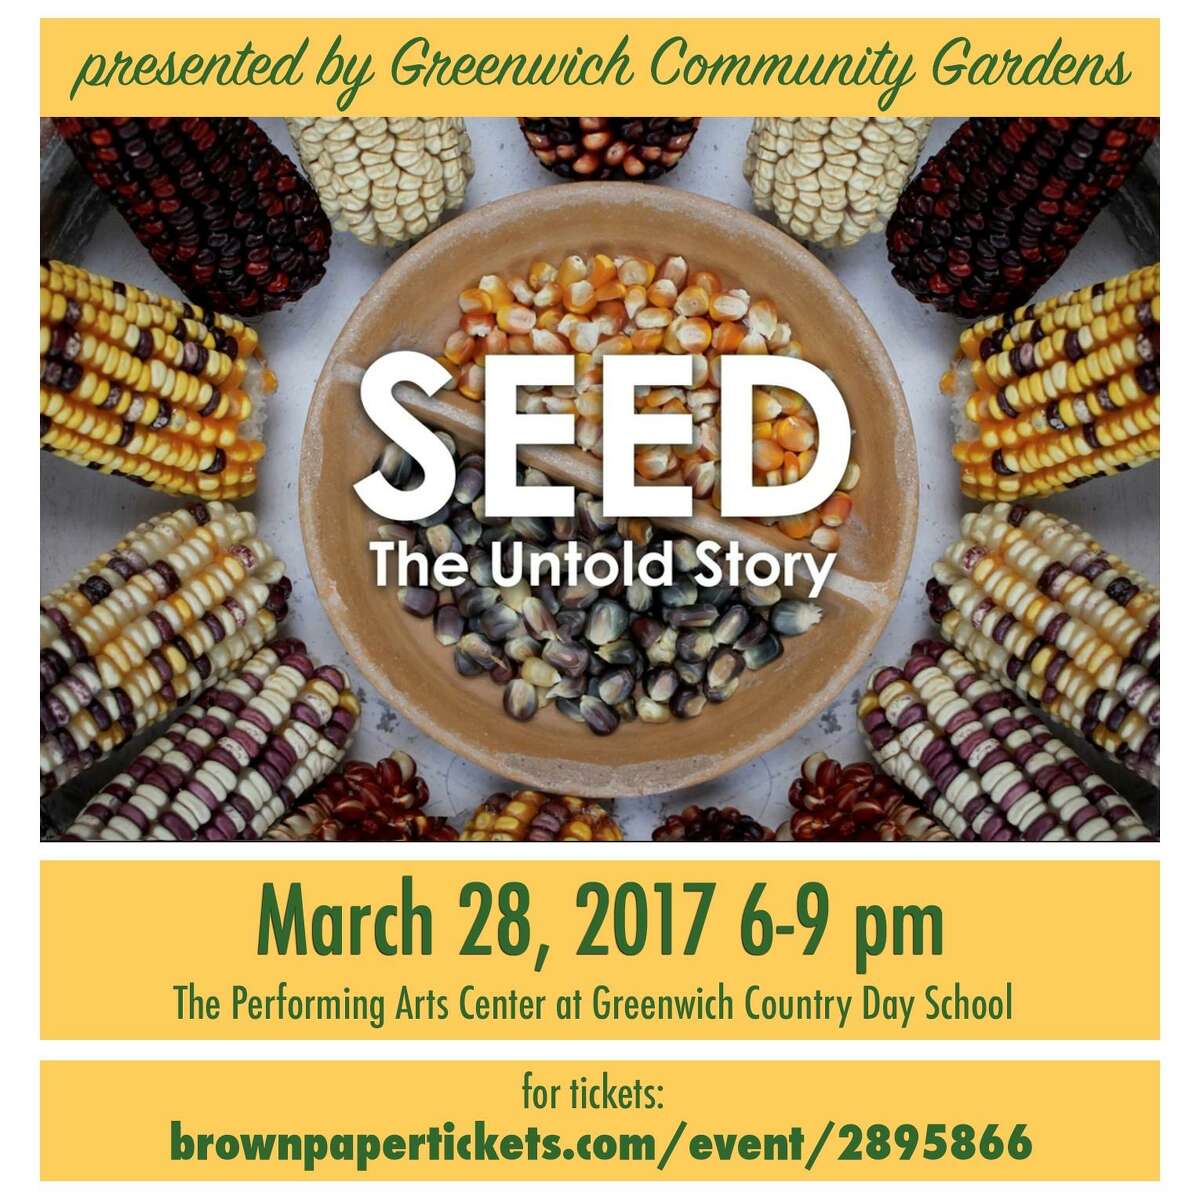 Greenwich Community Gardens will host their film showing of "SEED: The Untold Story" from 6p.m. to 9p.m. on Tuesday, March 28, 2017.